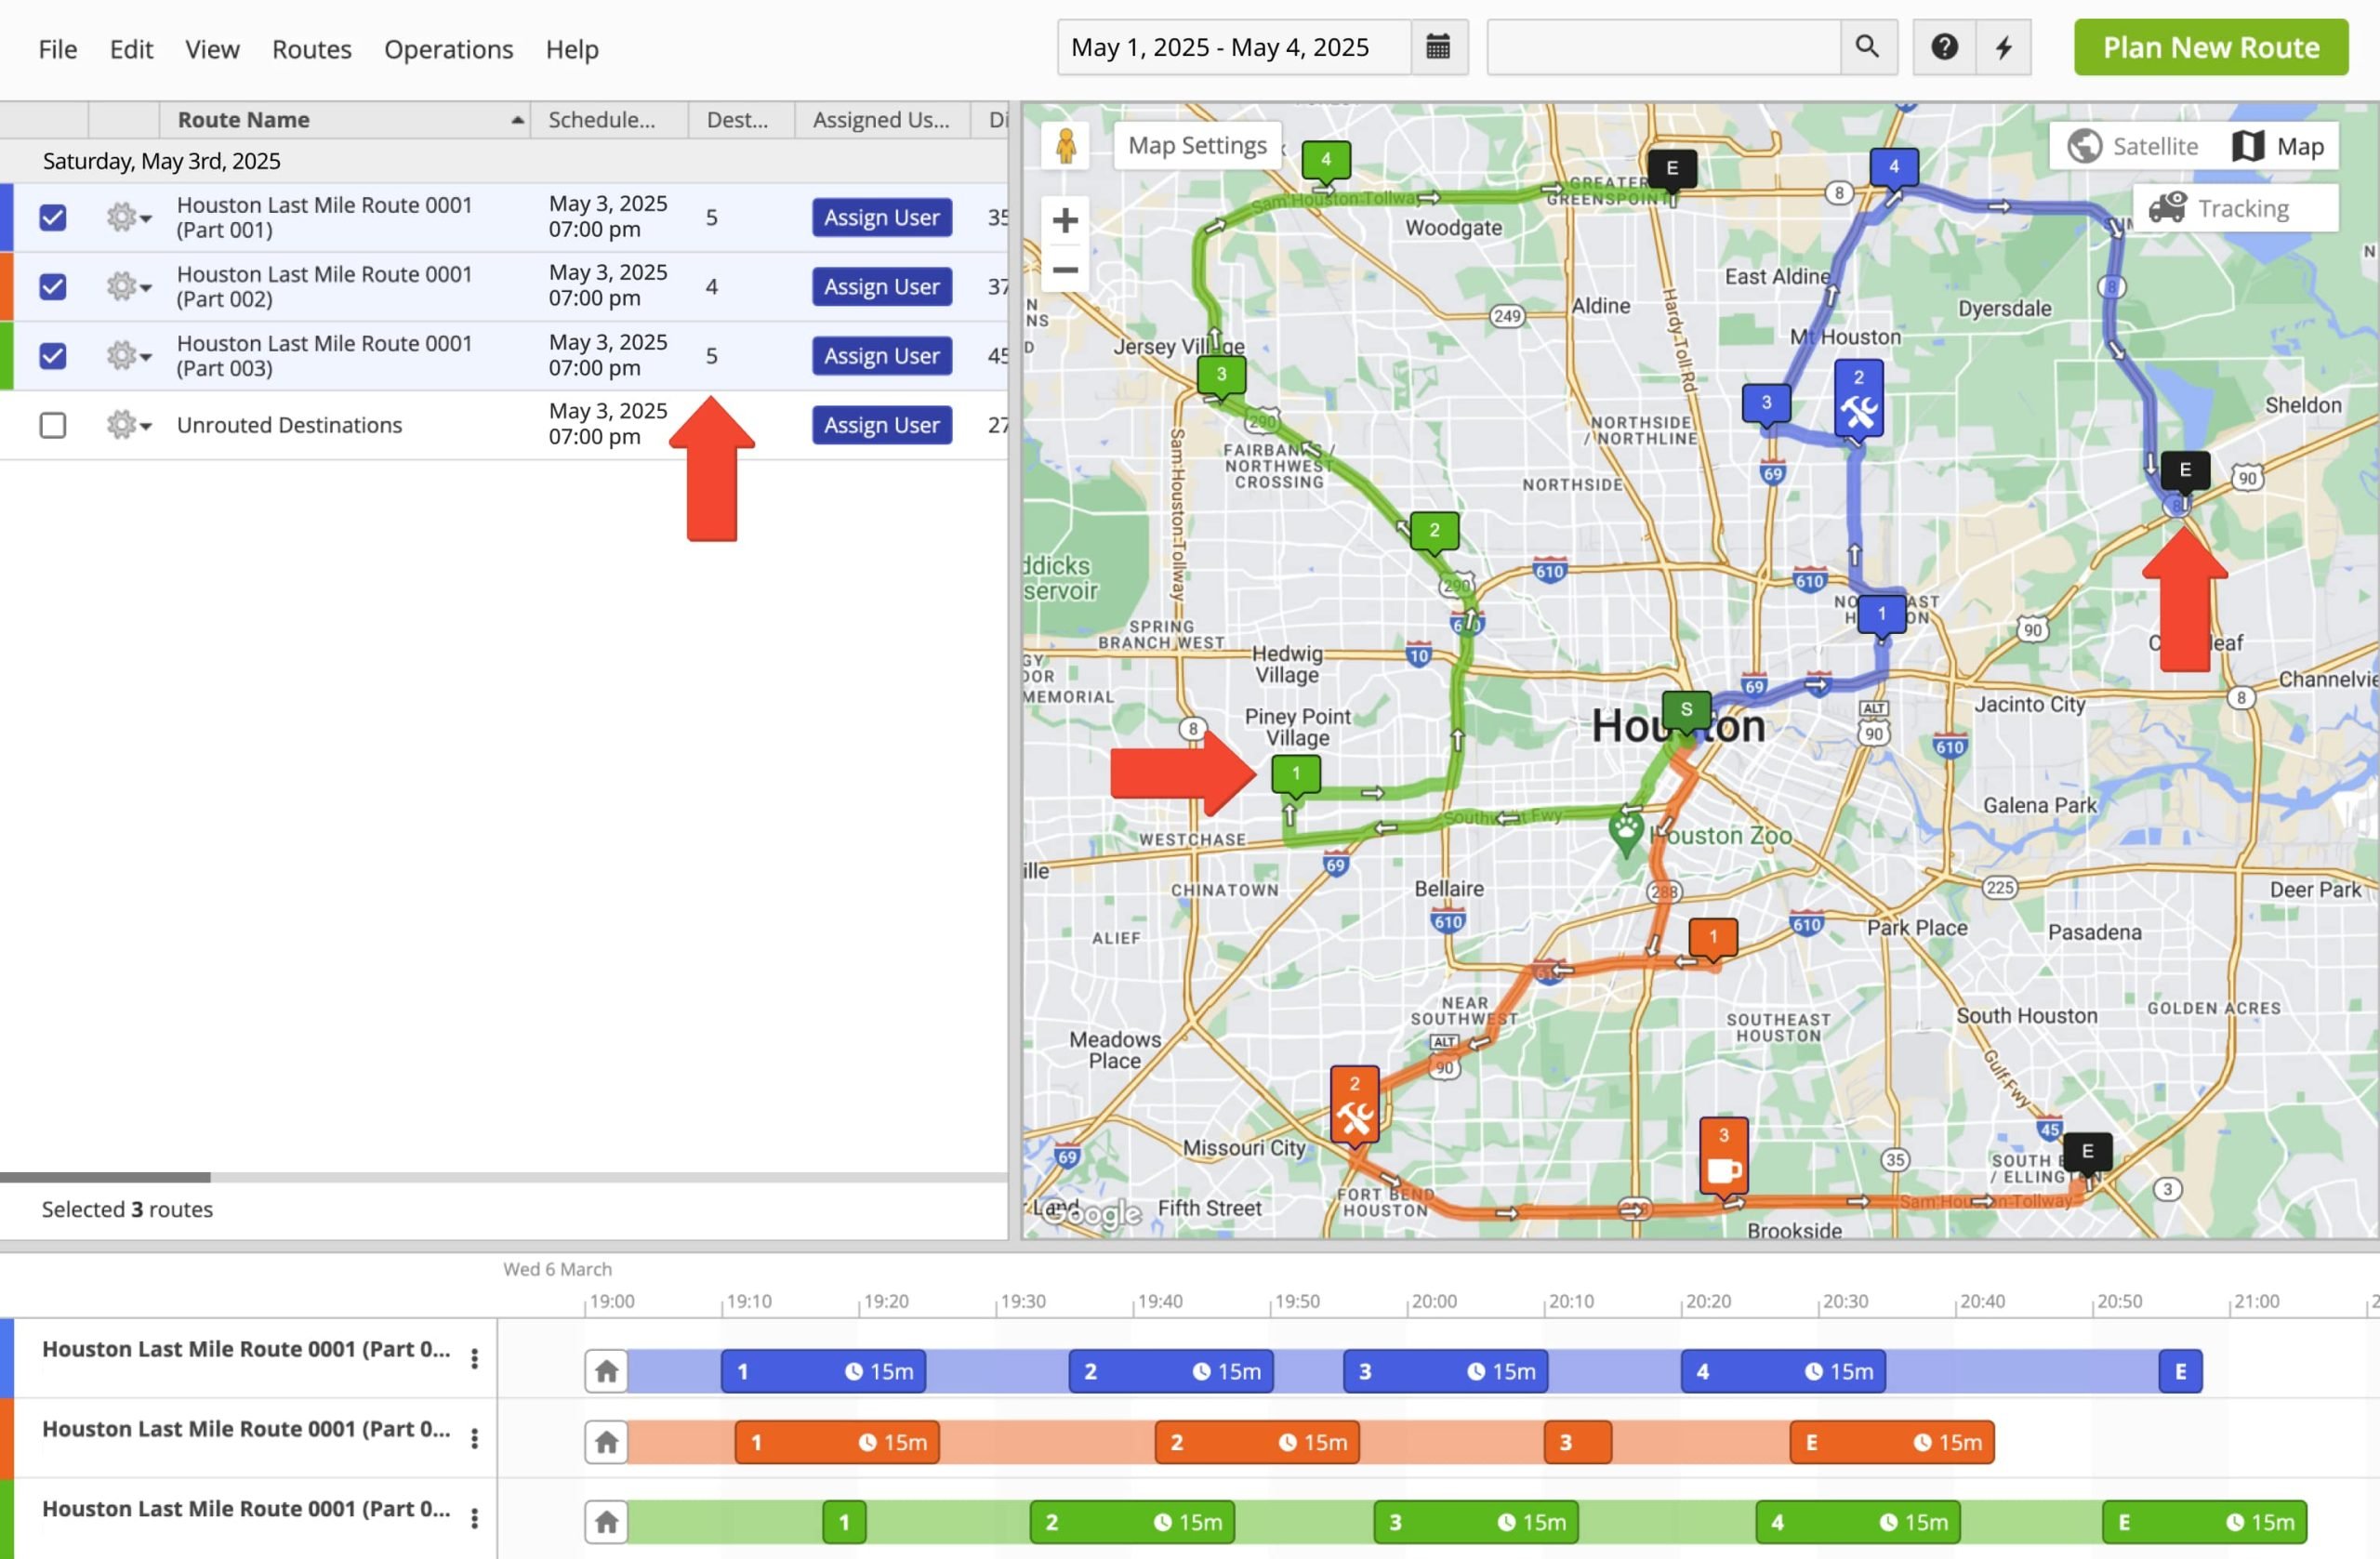 Adding unrouted destinations to optimized routes may lead to those routes exceeding your specified constraint settings.